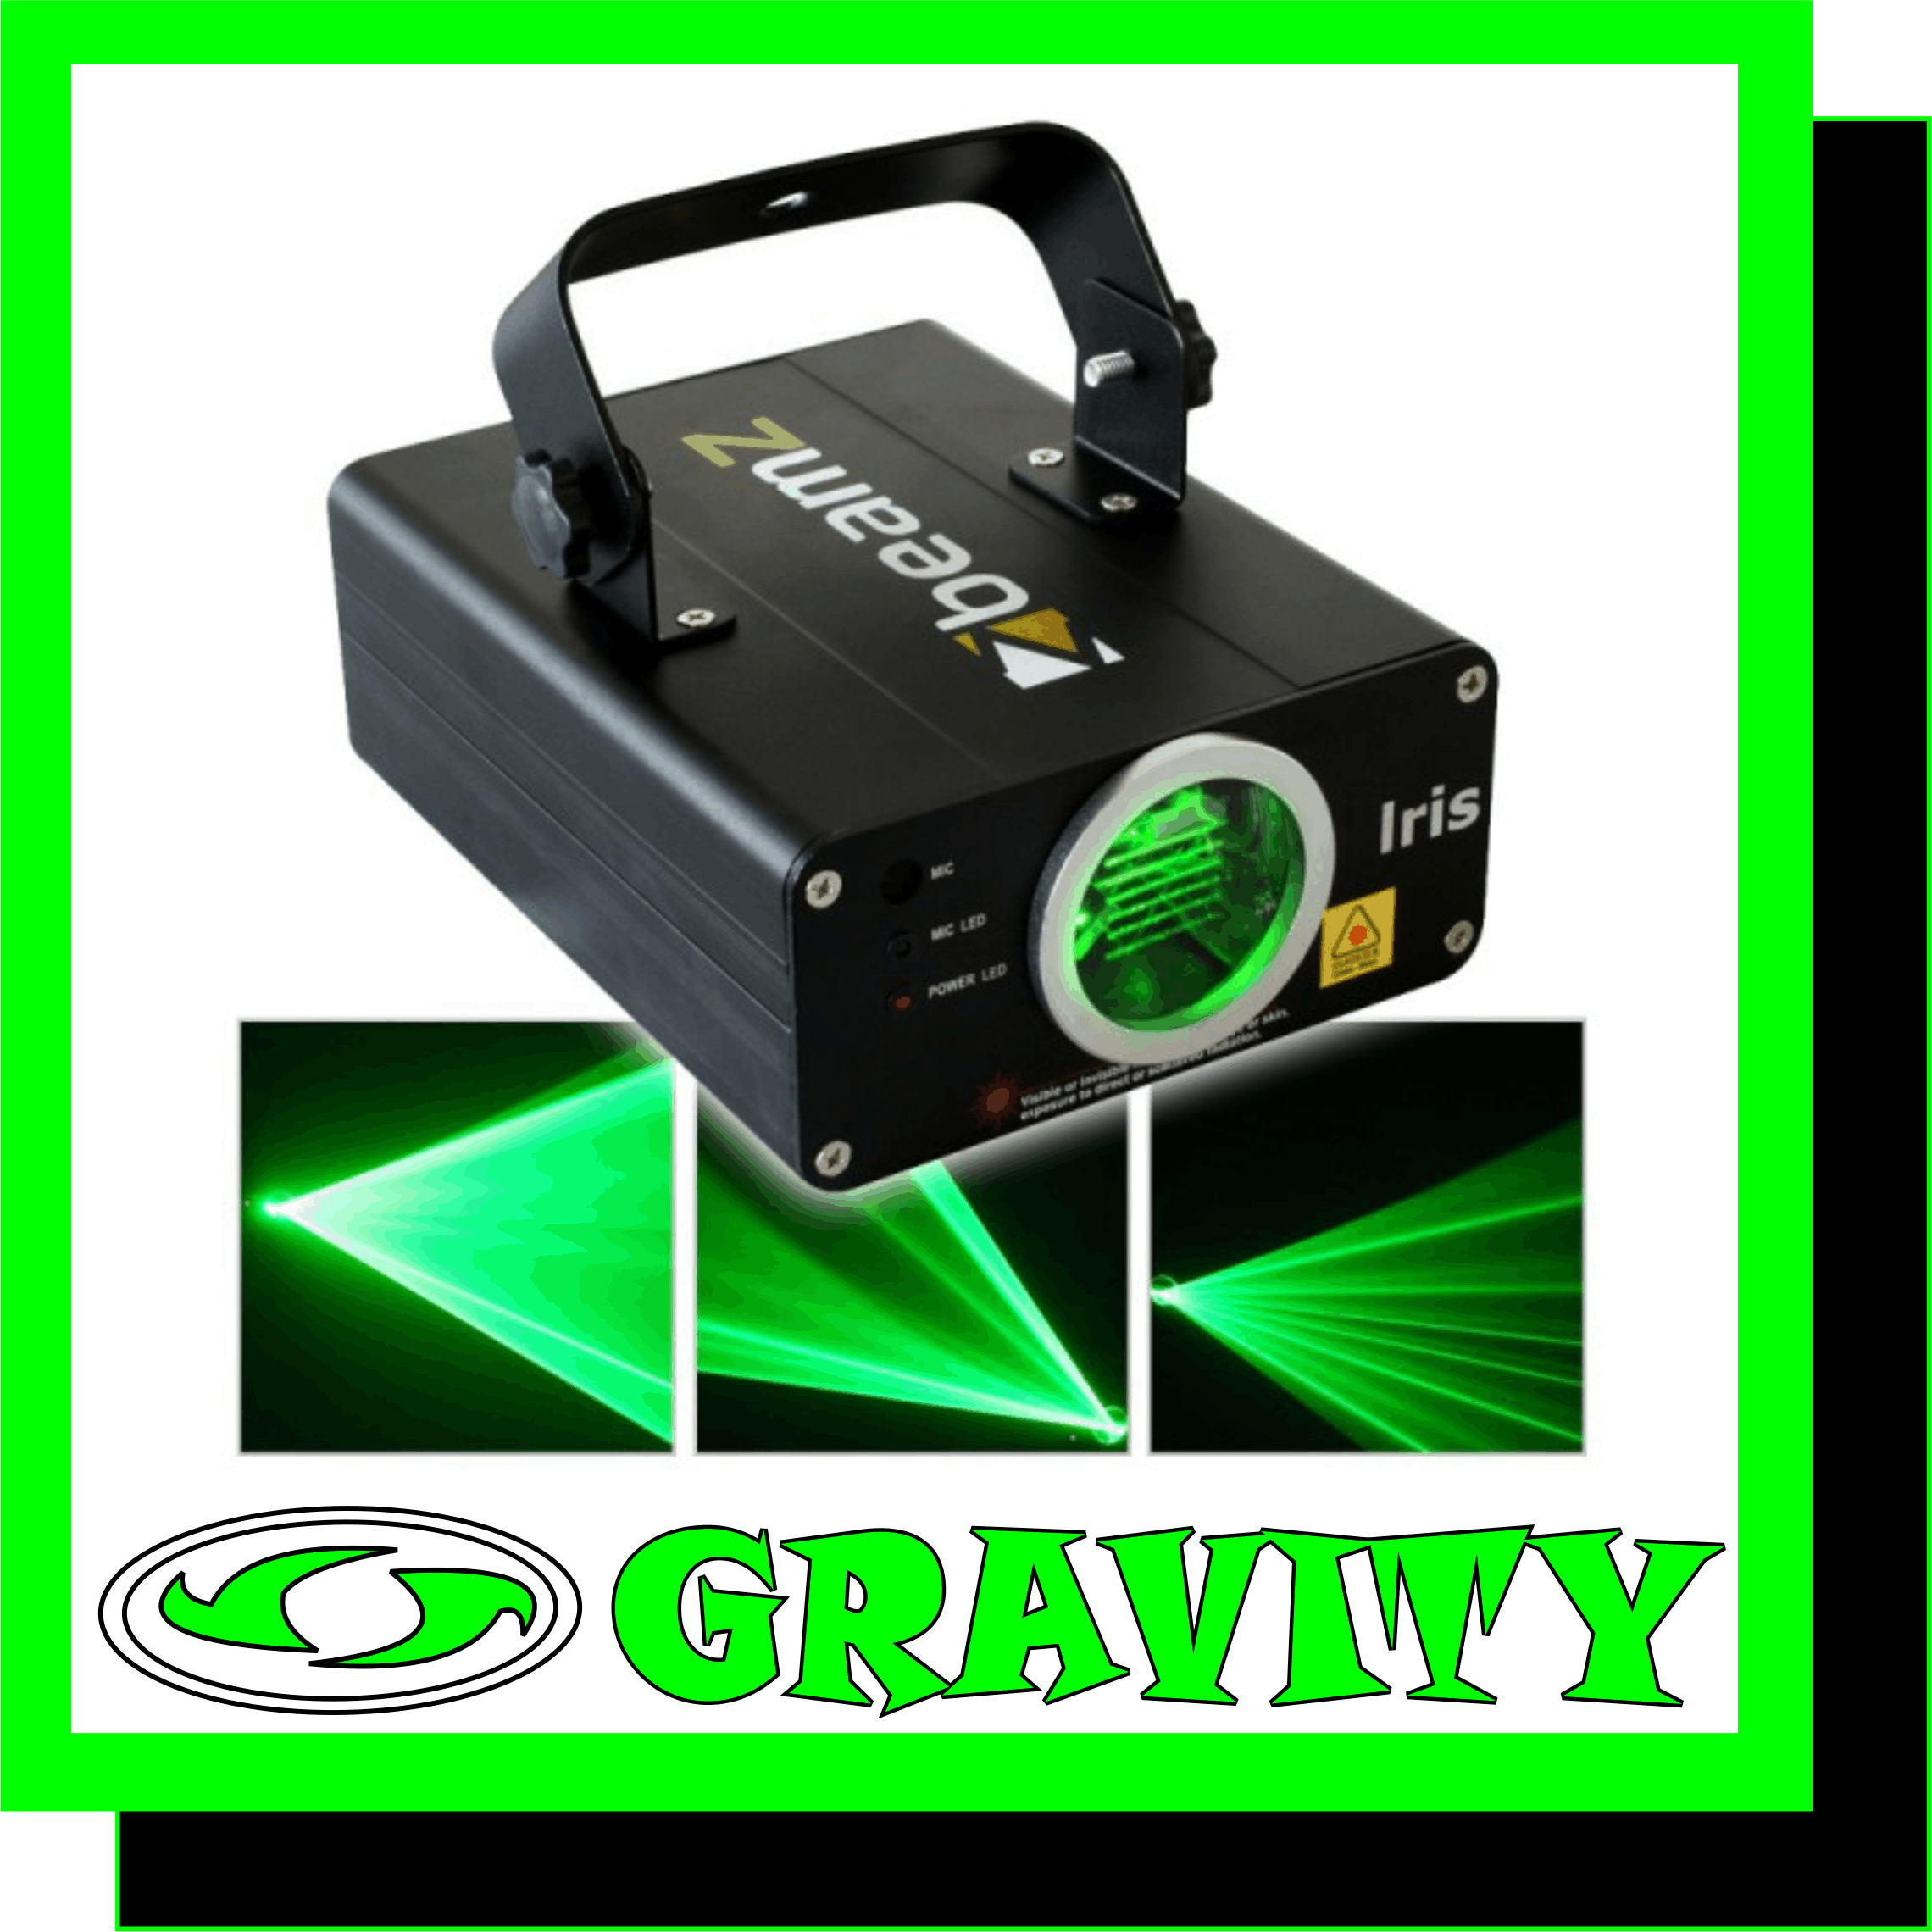 BEAMZ IRIS EFFECT GREEN 50MW DMX LASER  -Green laserbeams 50mW -7 DMX channels -Stand alone and music controlled -Preprogrammed patterns -Incl. mountingbracket -Laser:Green laser 50mW -DMX Channels:7 channels -Wave Length:532nm -Power Supply:220-240Vac, 50Hz -Dimensions:207 x 145 x 110 mm -Weight:1.8 KG